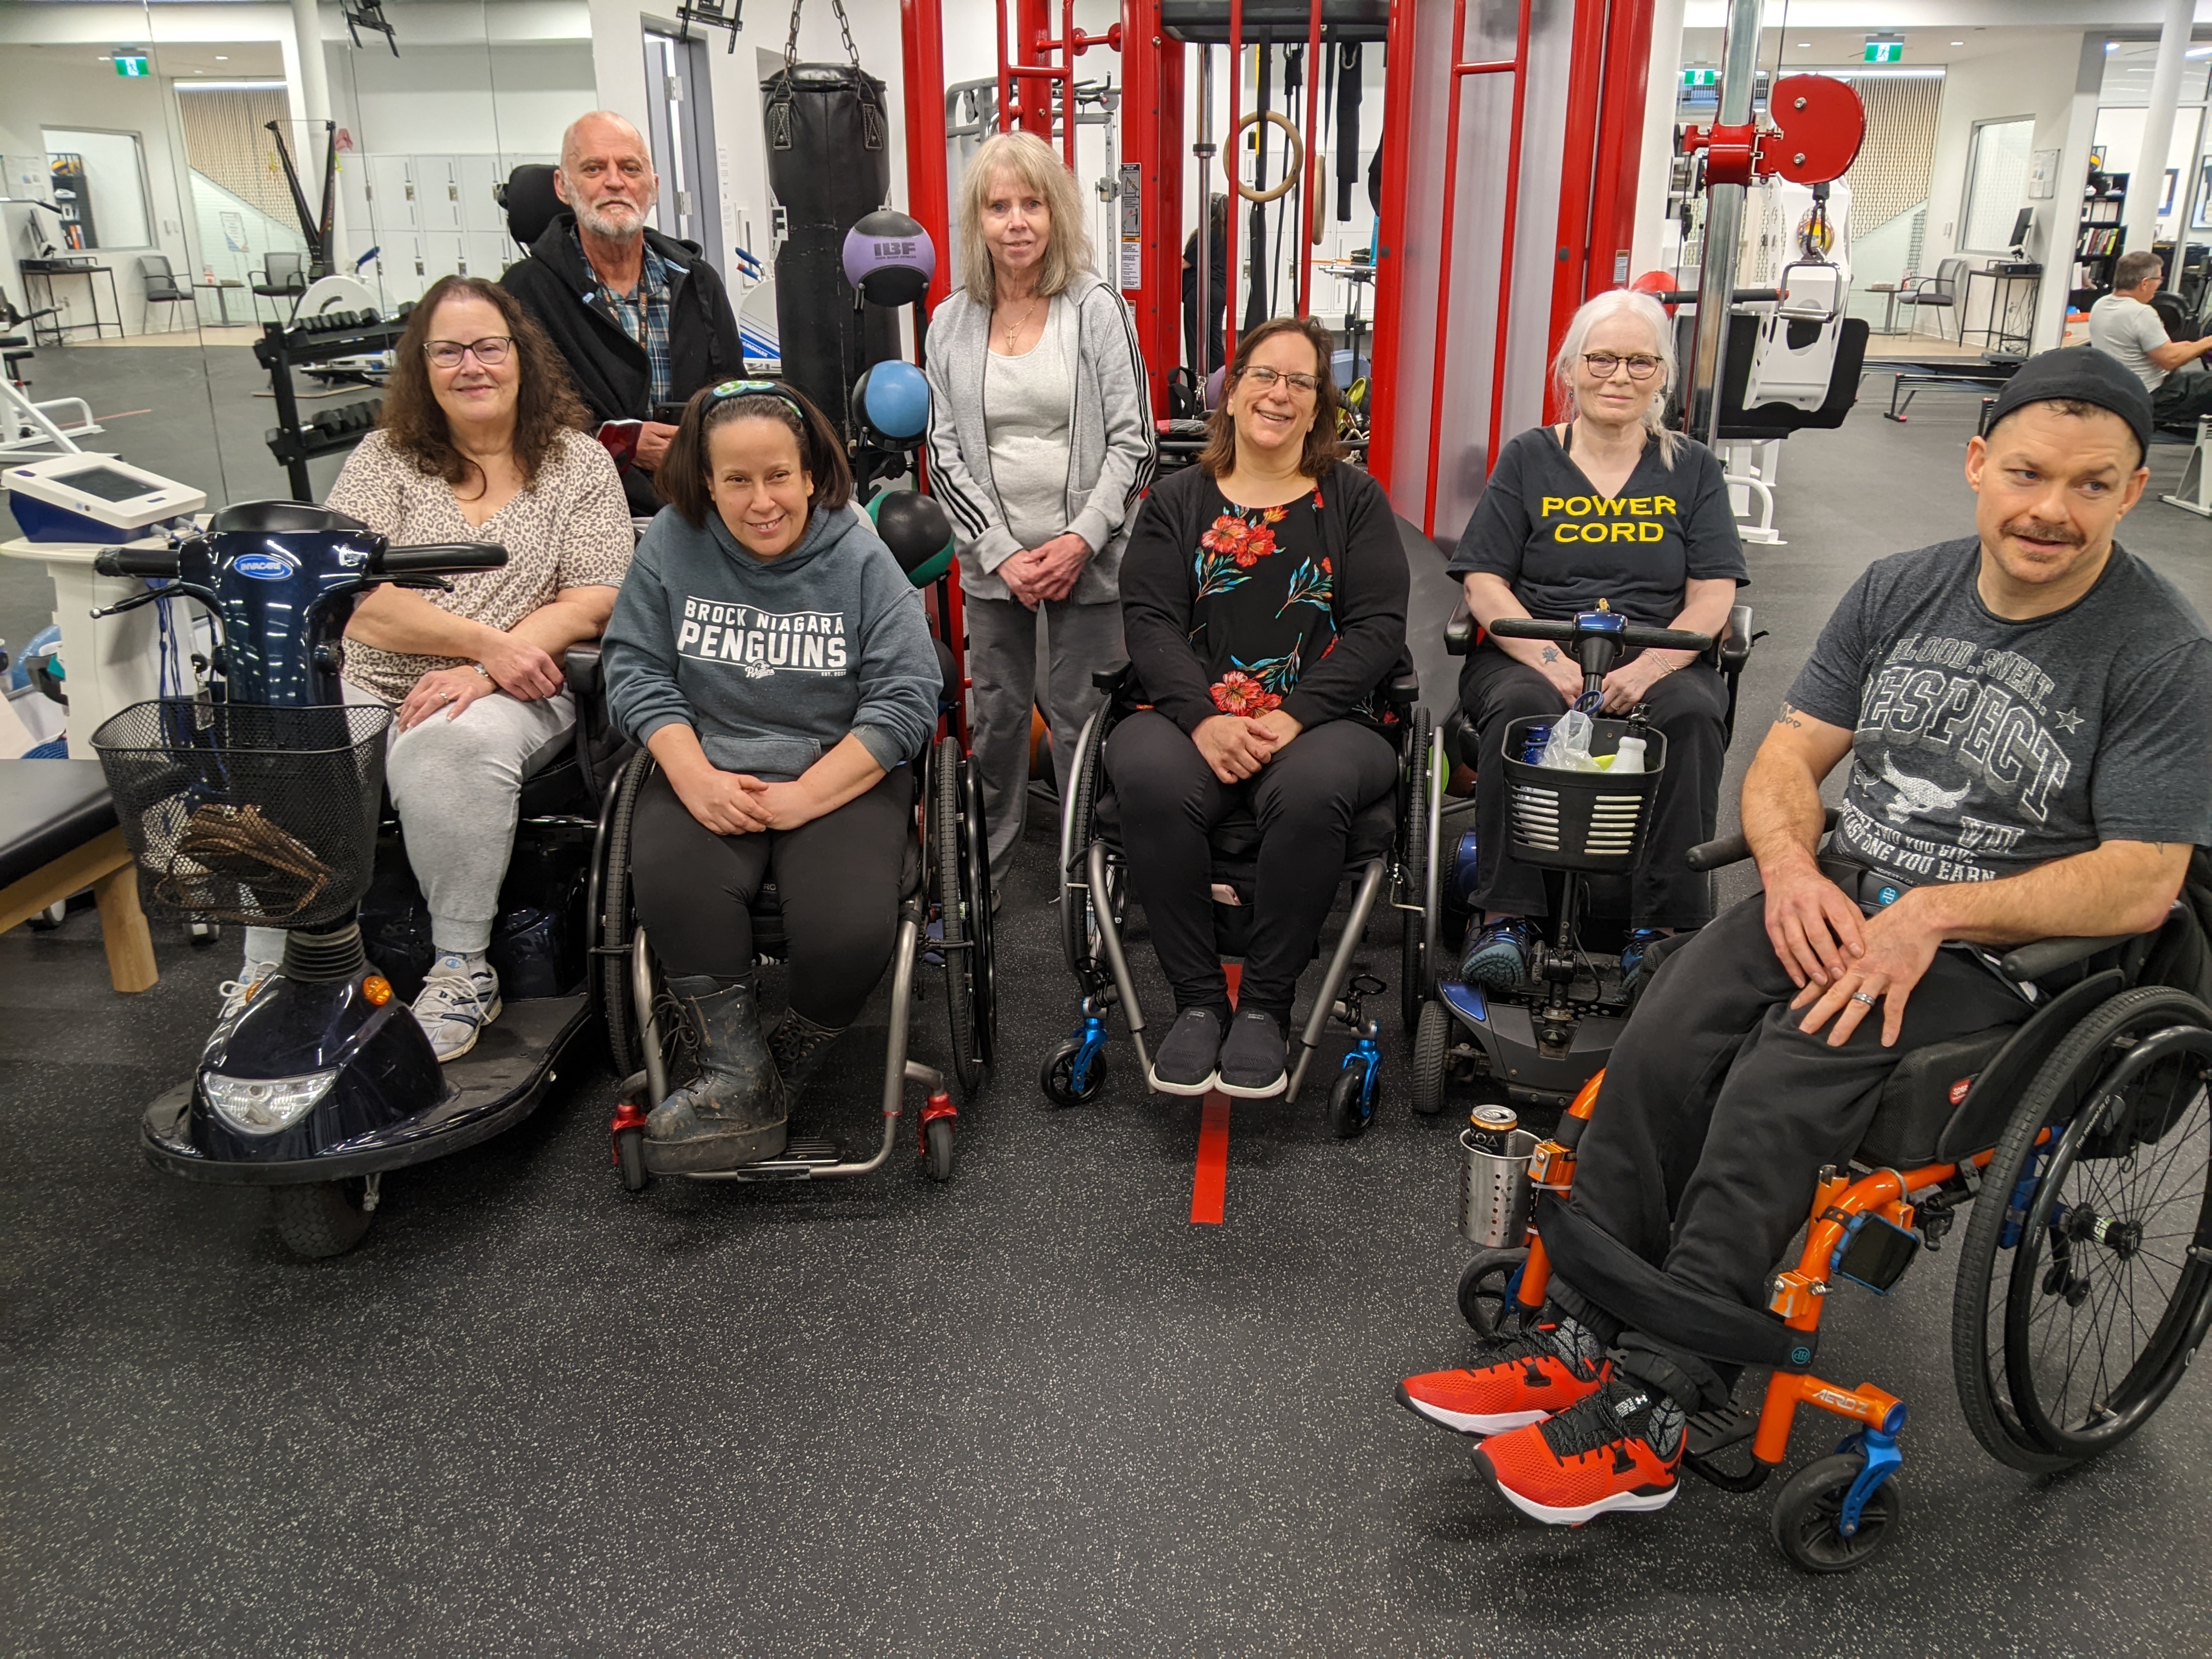 Seven individuals pose for the camera in two rows in front of gym equipment. Most are seated in mobility devices, and one is standing.